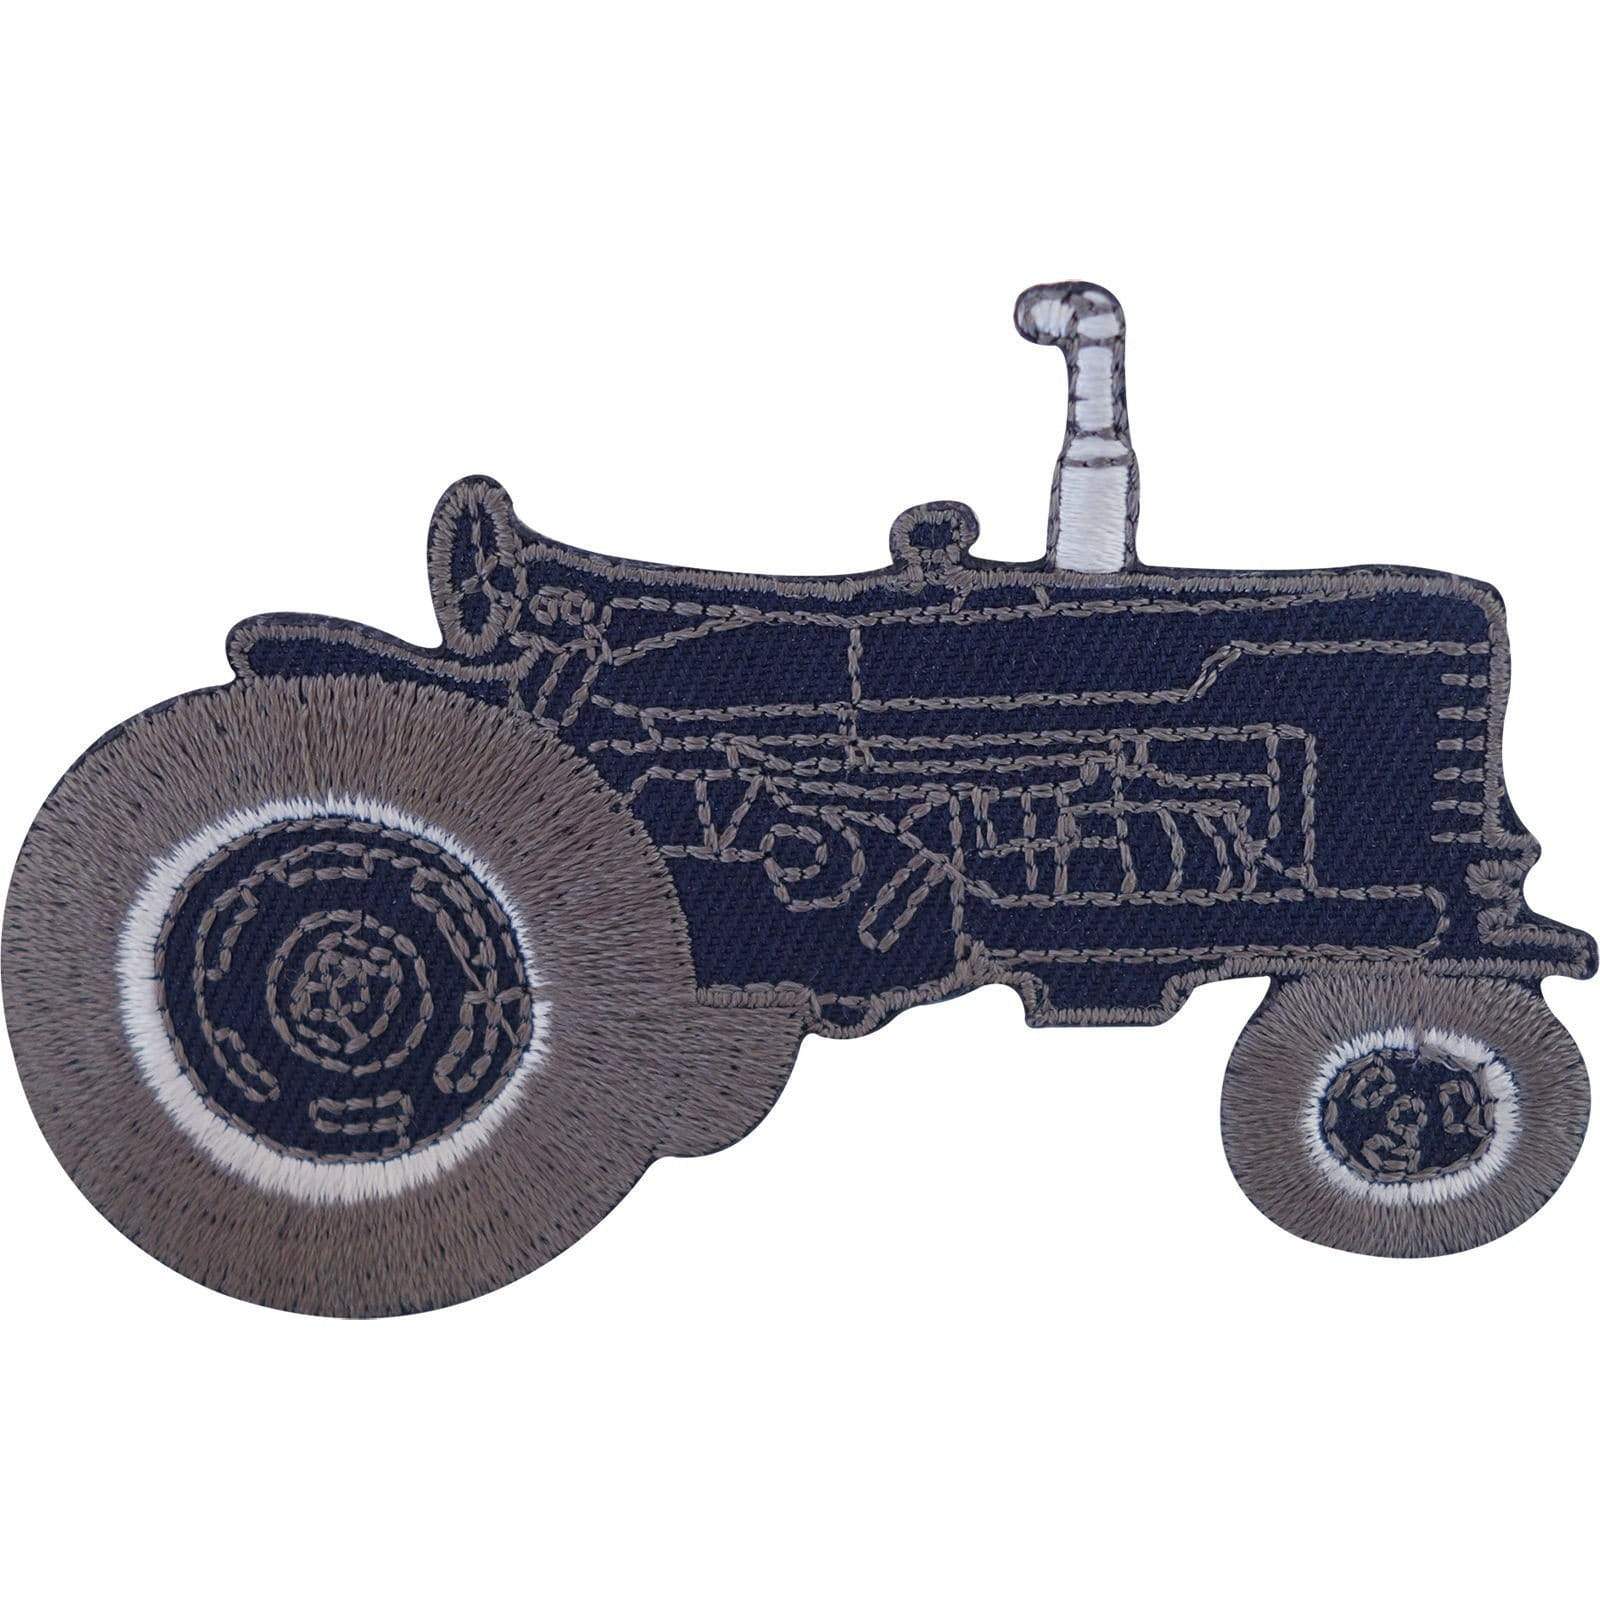 Tractor Iron On Patch Sew On Farmer T Shirt Jacket Jeans Coat Embroidered Badge